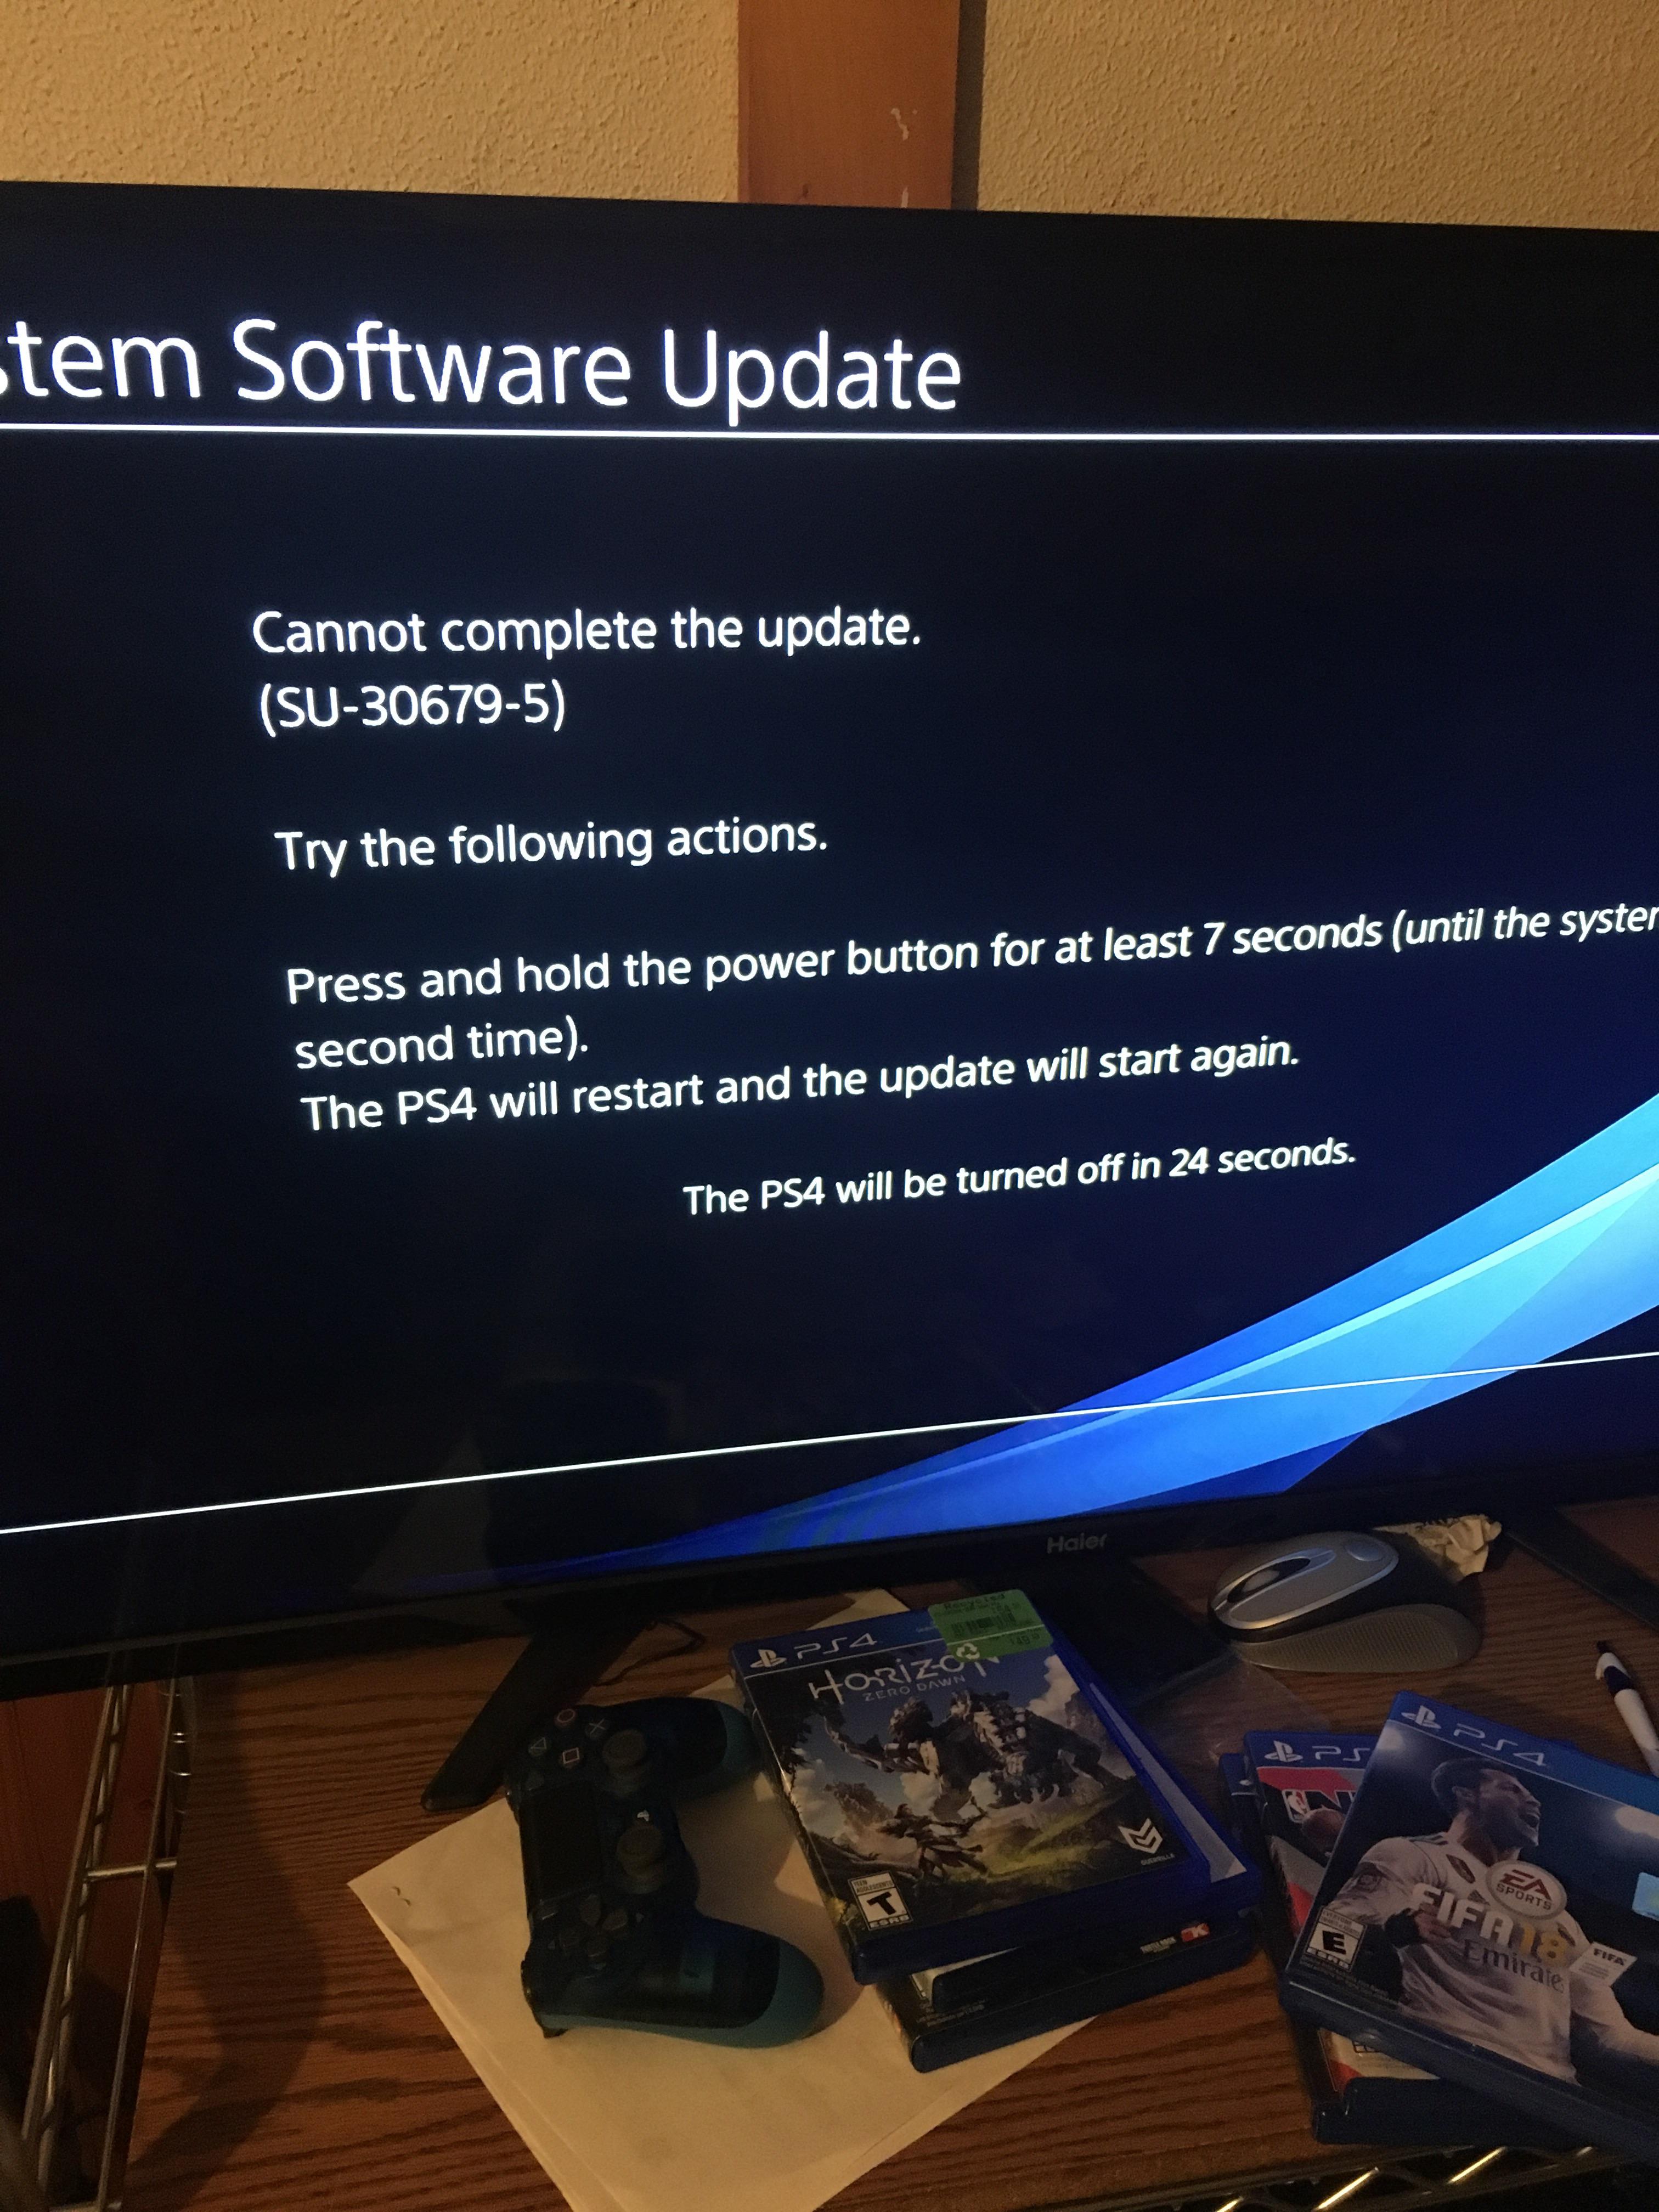 Wait for the update to download and install.
Restart the PS4 after the update is complete.